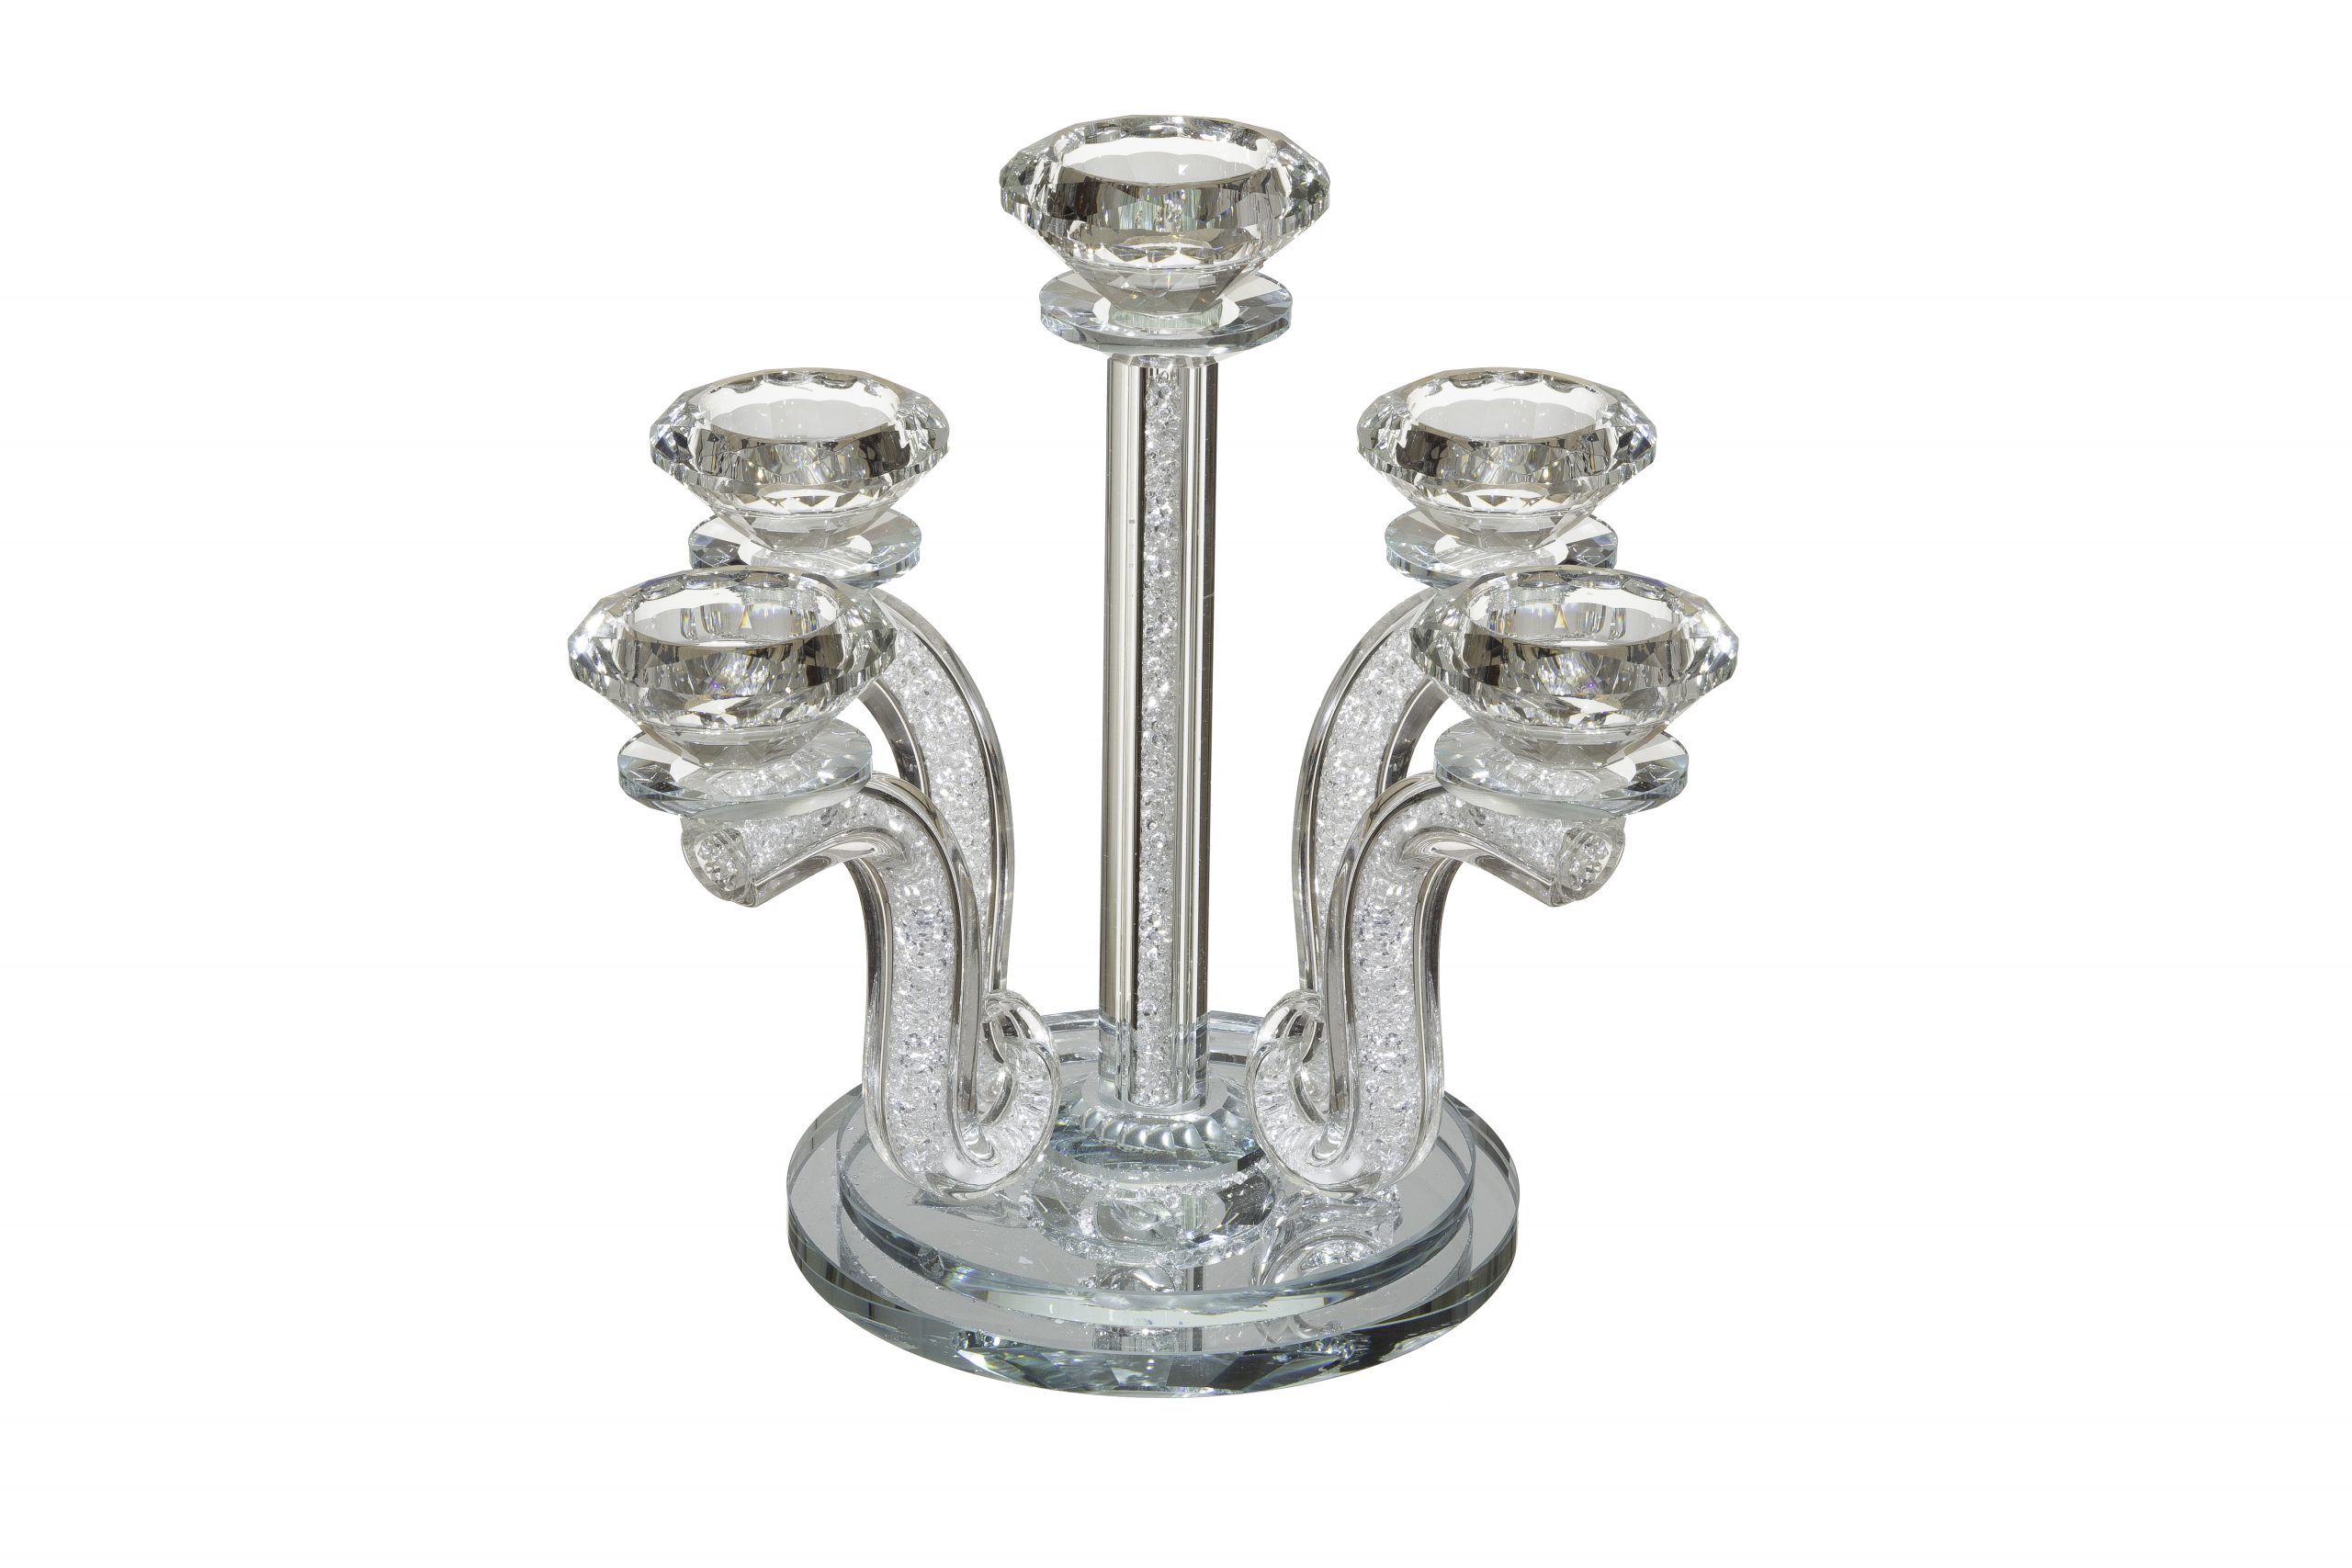 Elegant Crystal 5 Branches Candlesticks 23.5 Cm-inlaid With Decorative Clear Stones